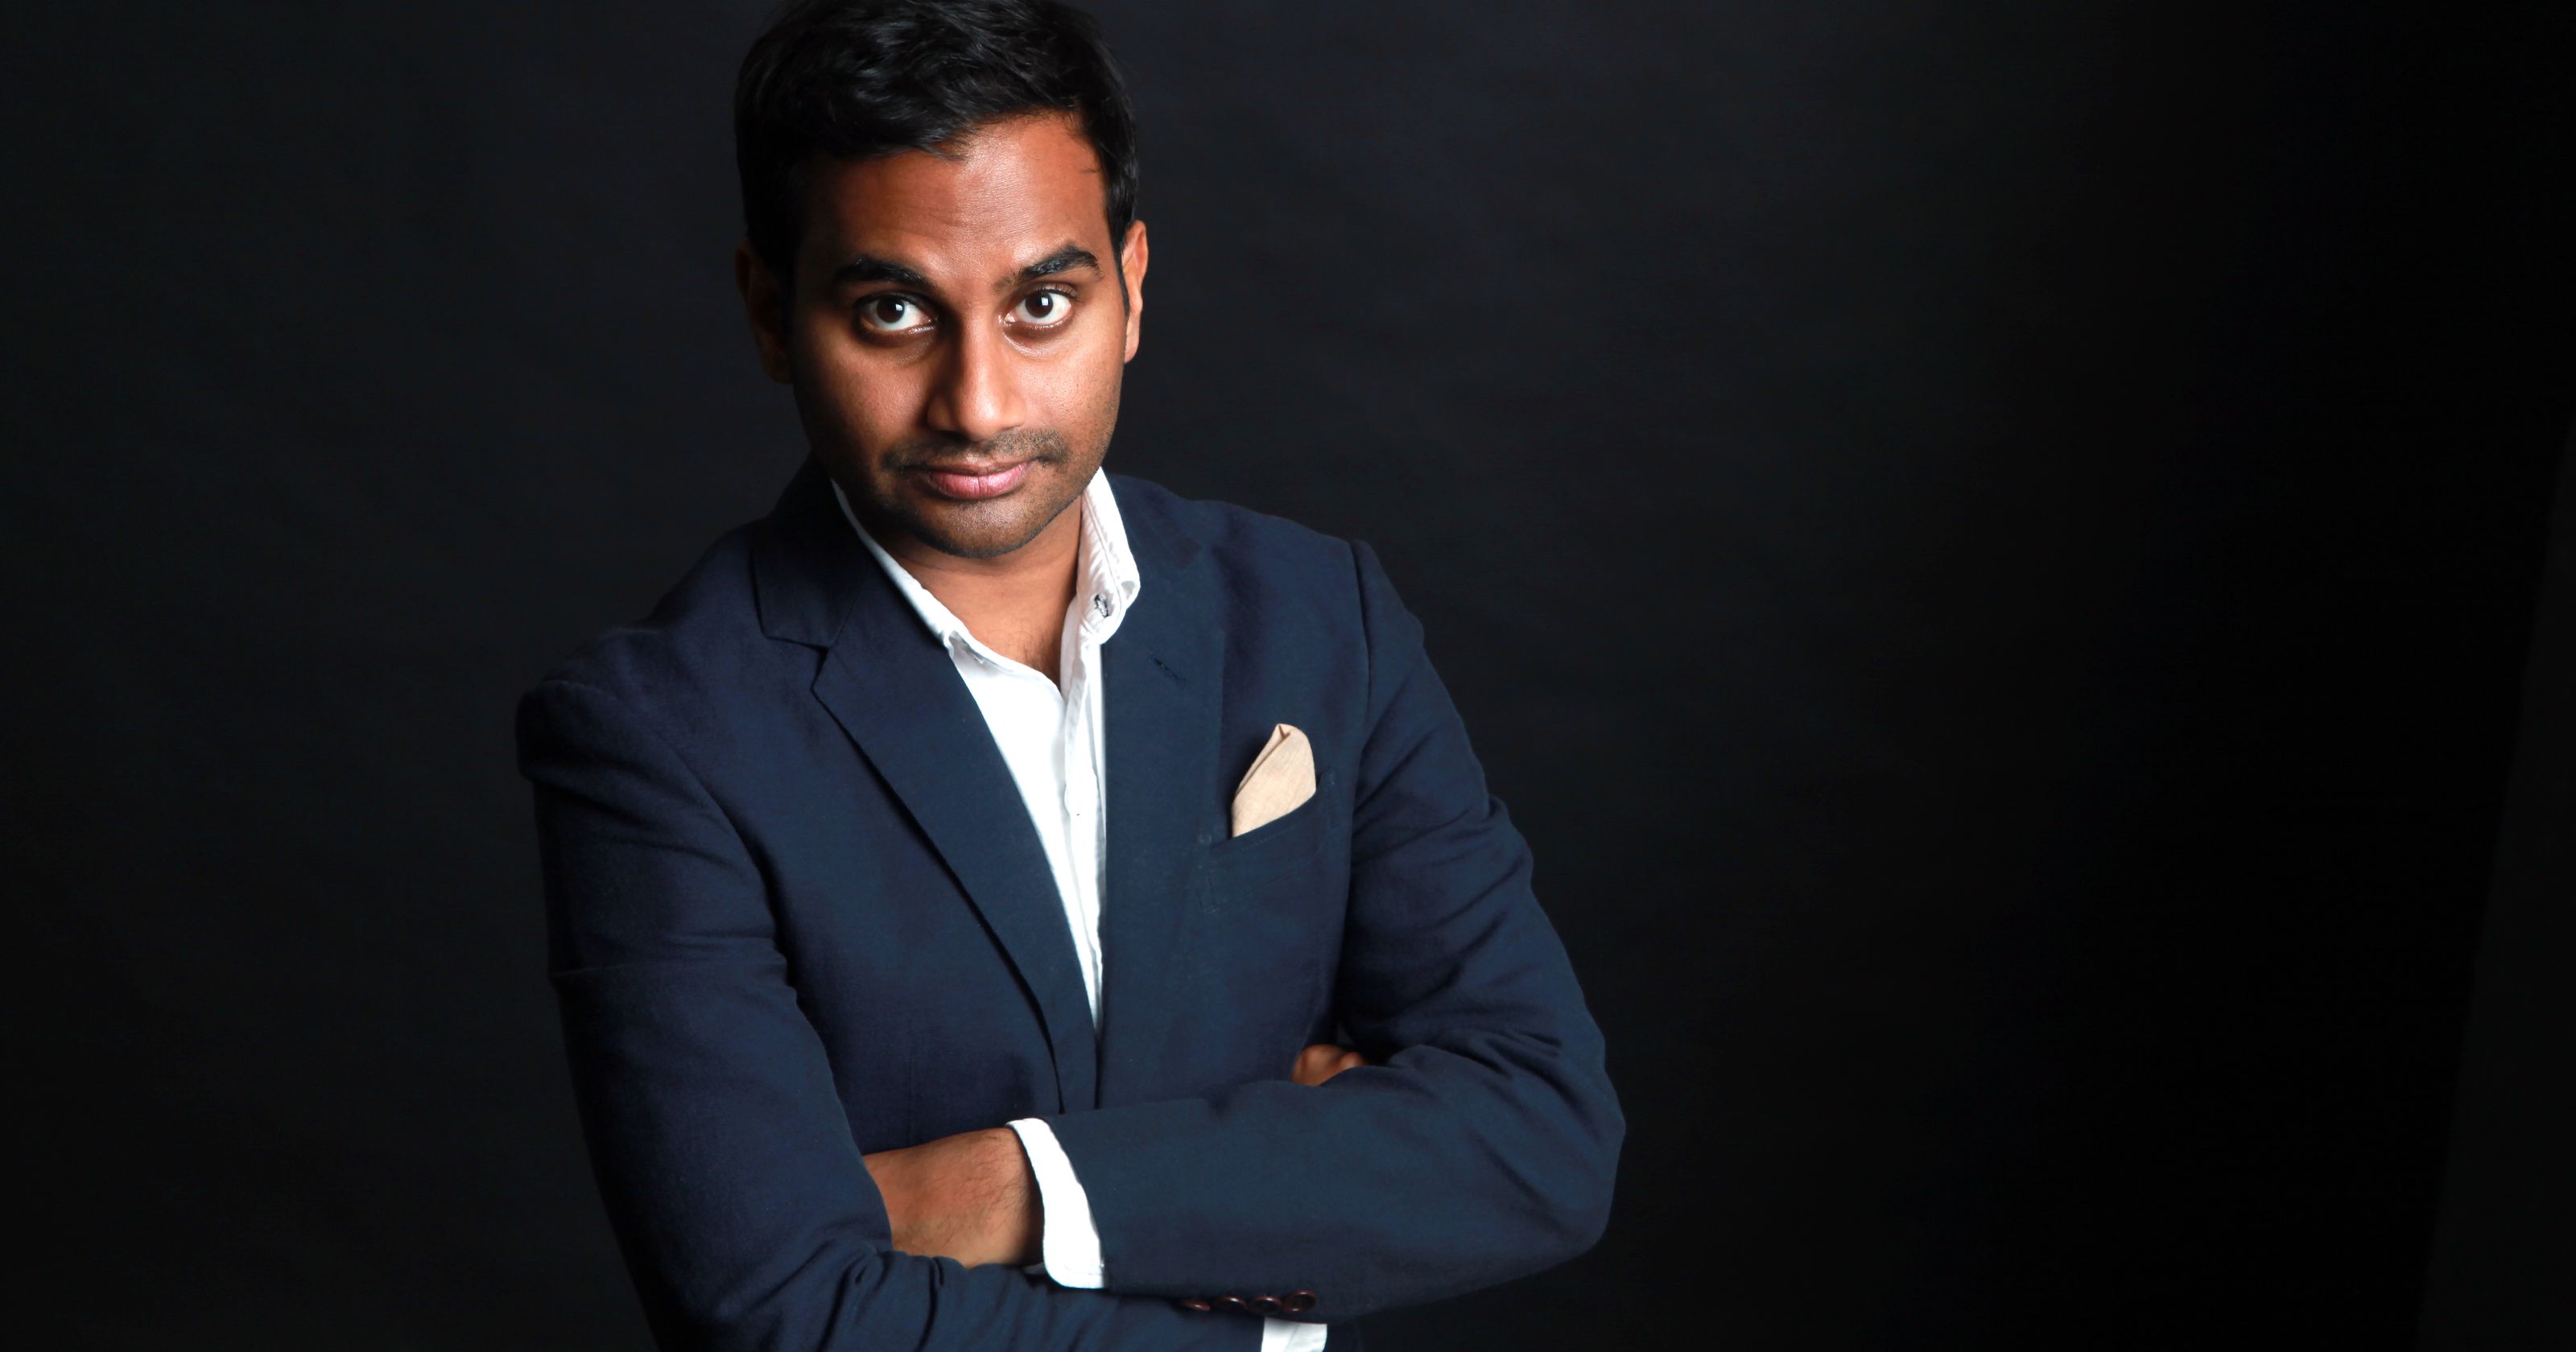 Comedian Aziz Ansari recently wrote an op-ed for the New York Times, saying that under a Trump presidential administration, he'd fear for the safety of his family.